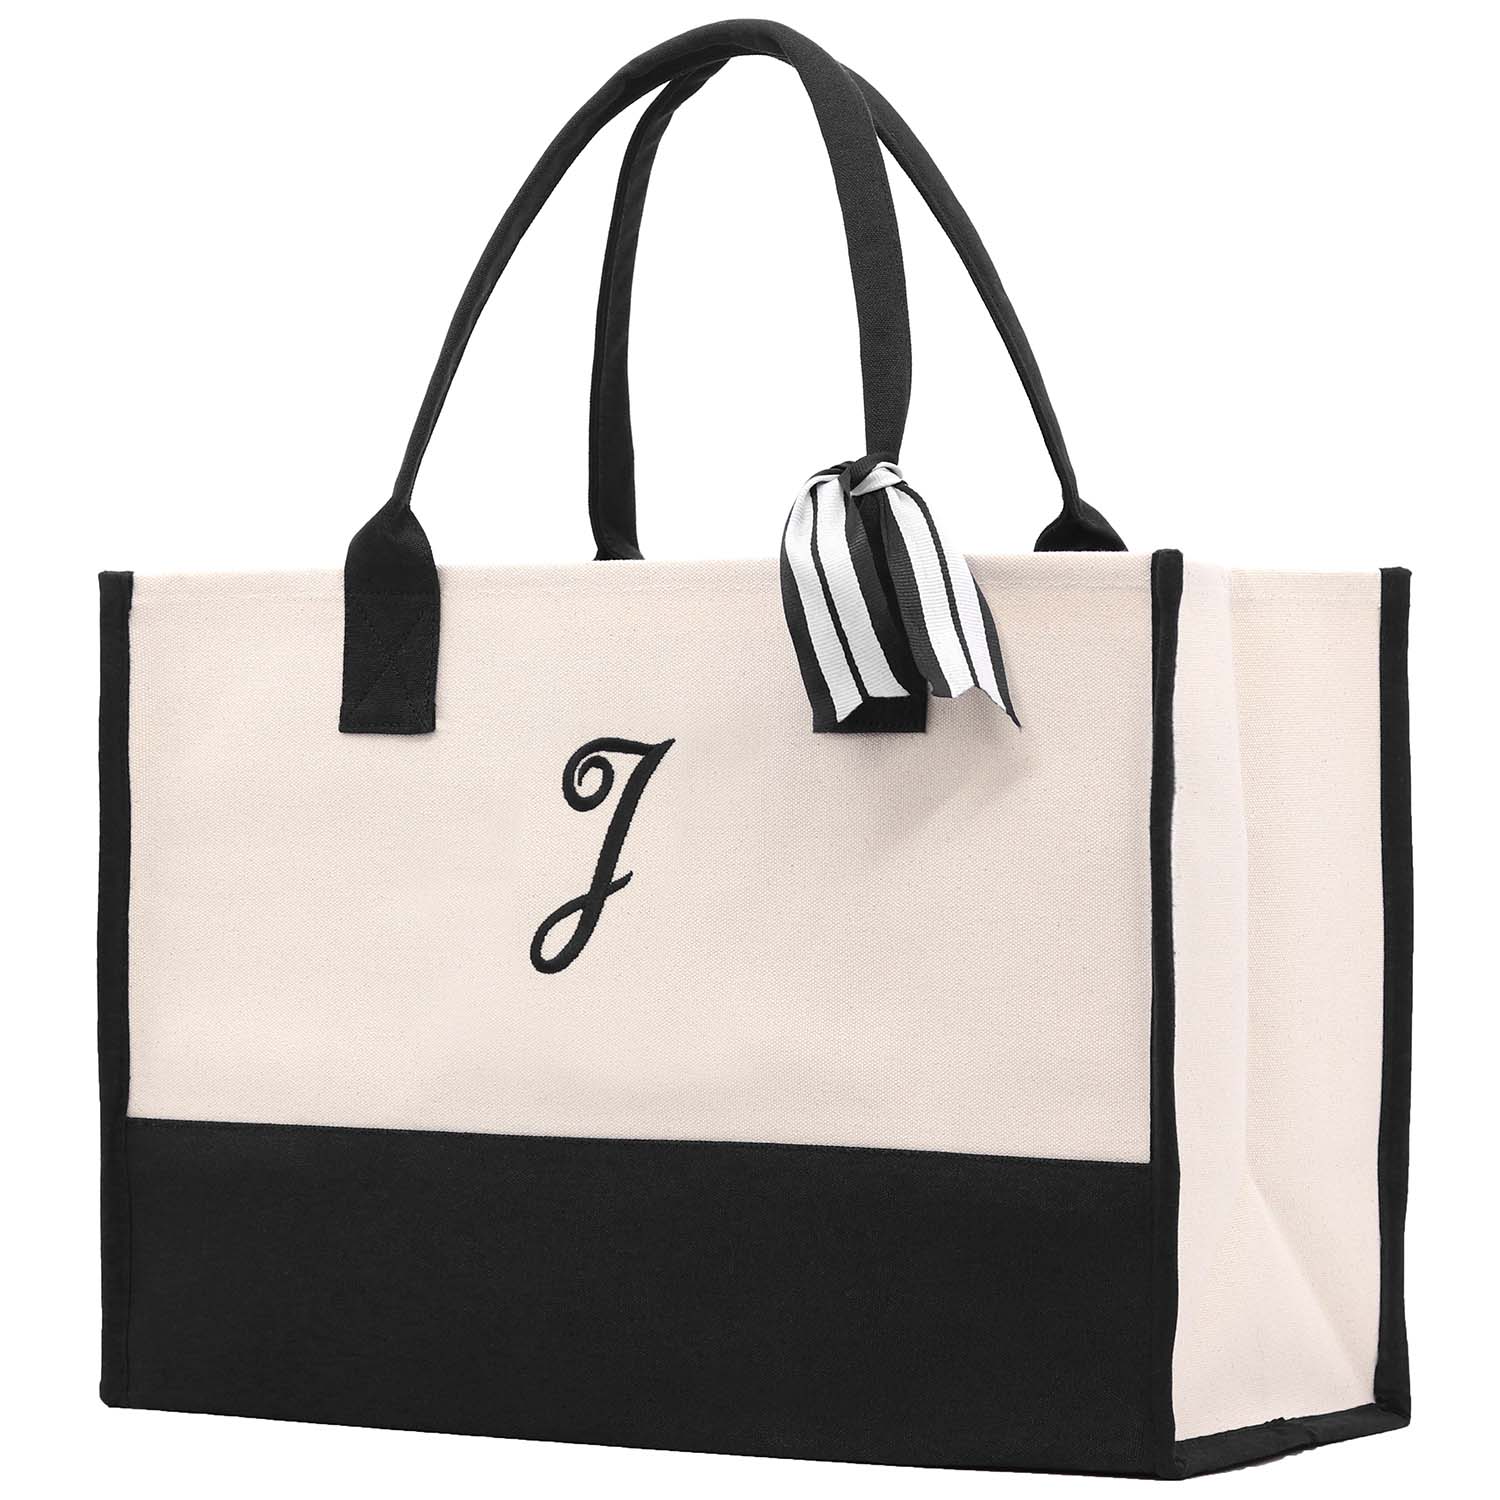 Monogram Tote Bag with 100% Cotton Canvas and a Chic Personalized Monogram (Black - Script Font)